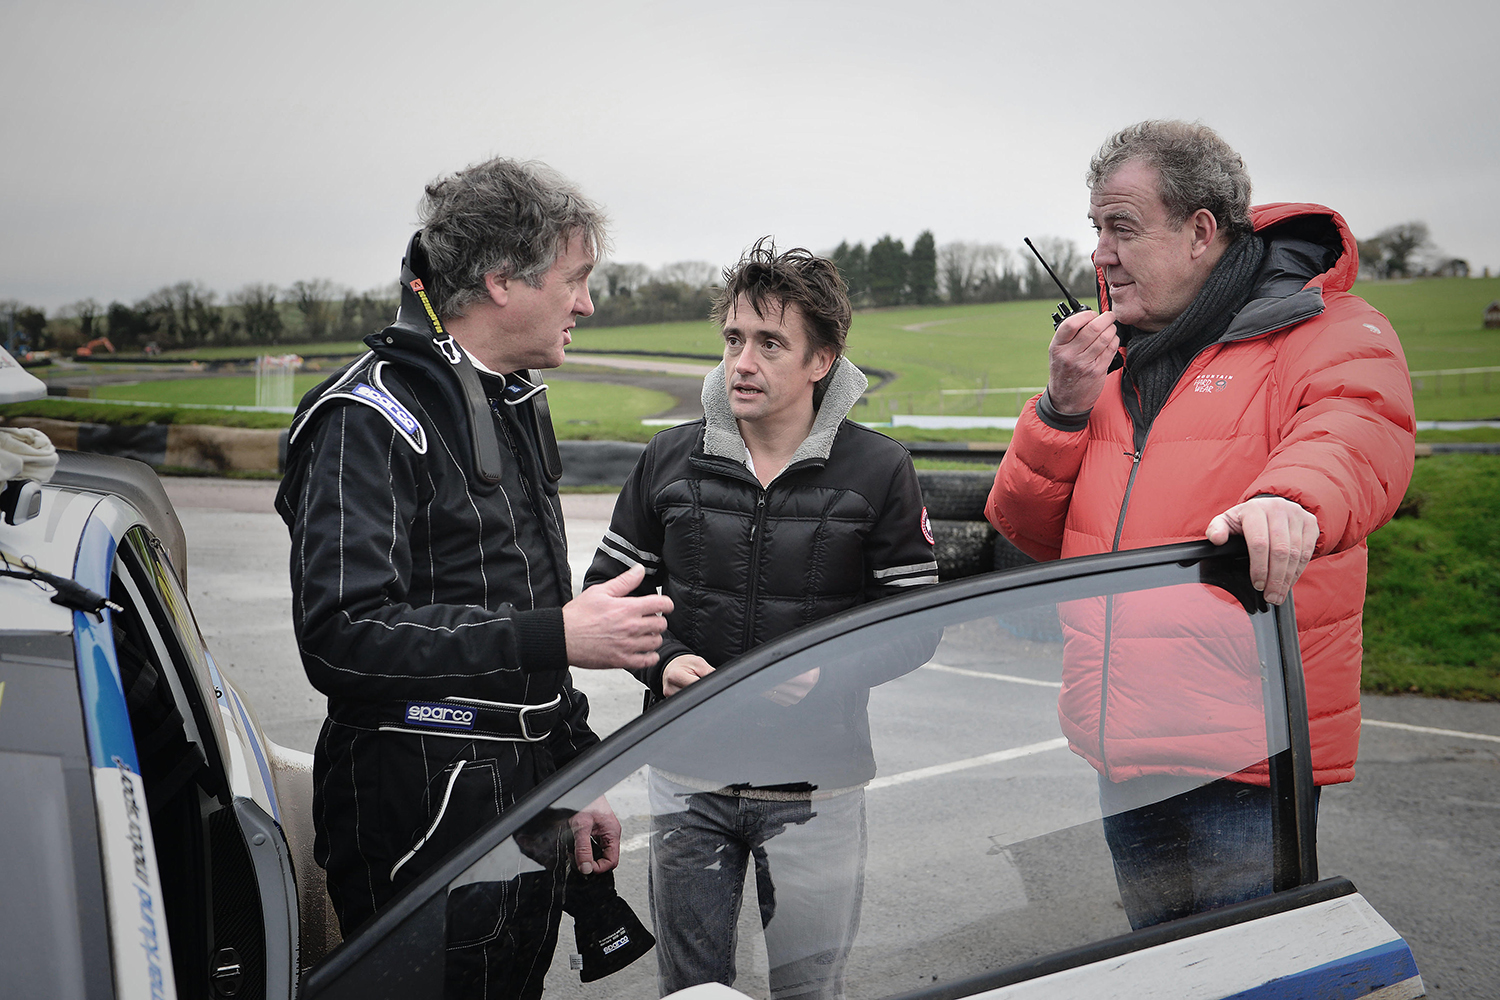 Top Gear Previews Final Extended Episode For Clarkson, Hammond, May: Video